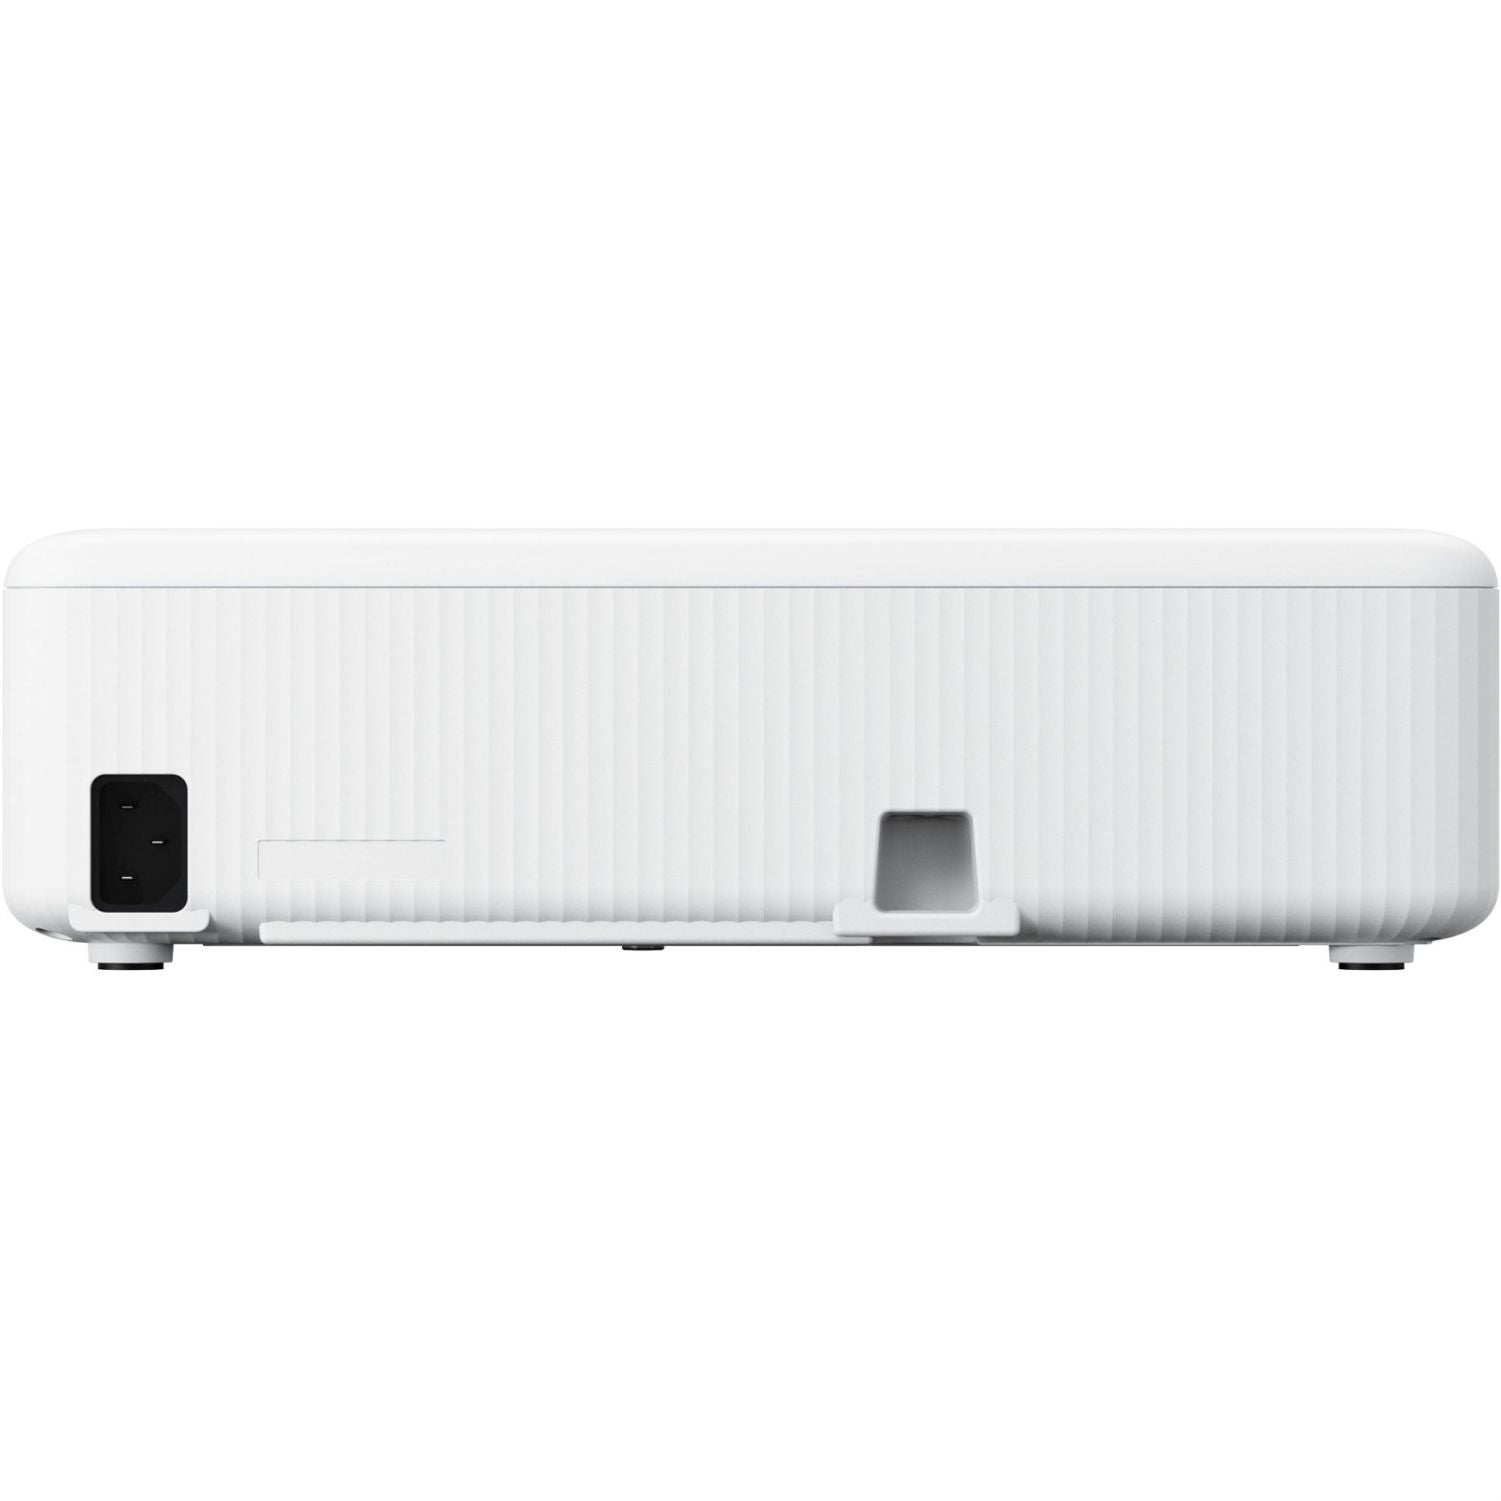 Epson EpiqVision Flex CO-W01 Portable Projector, 3-Chip 3LCD, Built-in Speaker, 300" Home Entertainment and Work - White